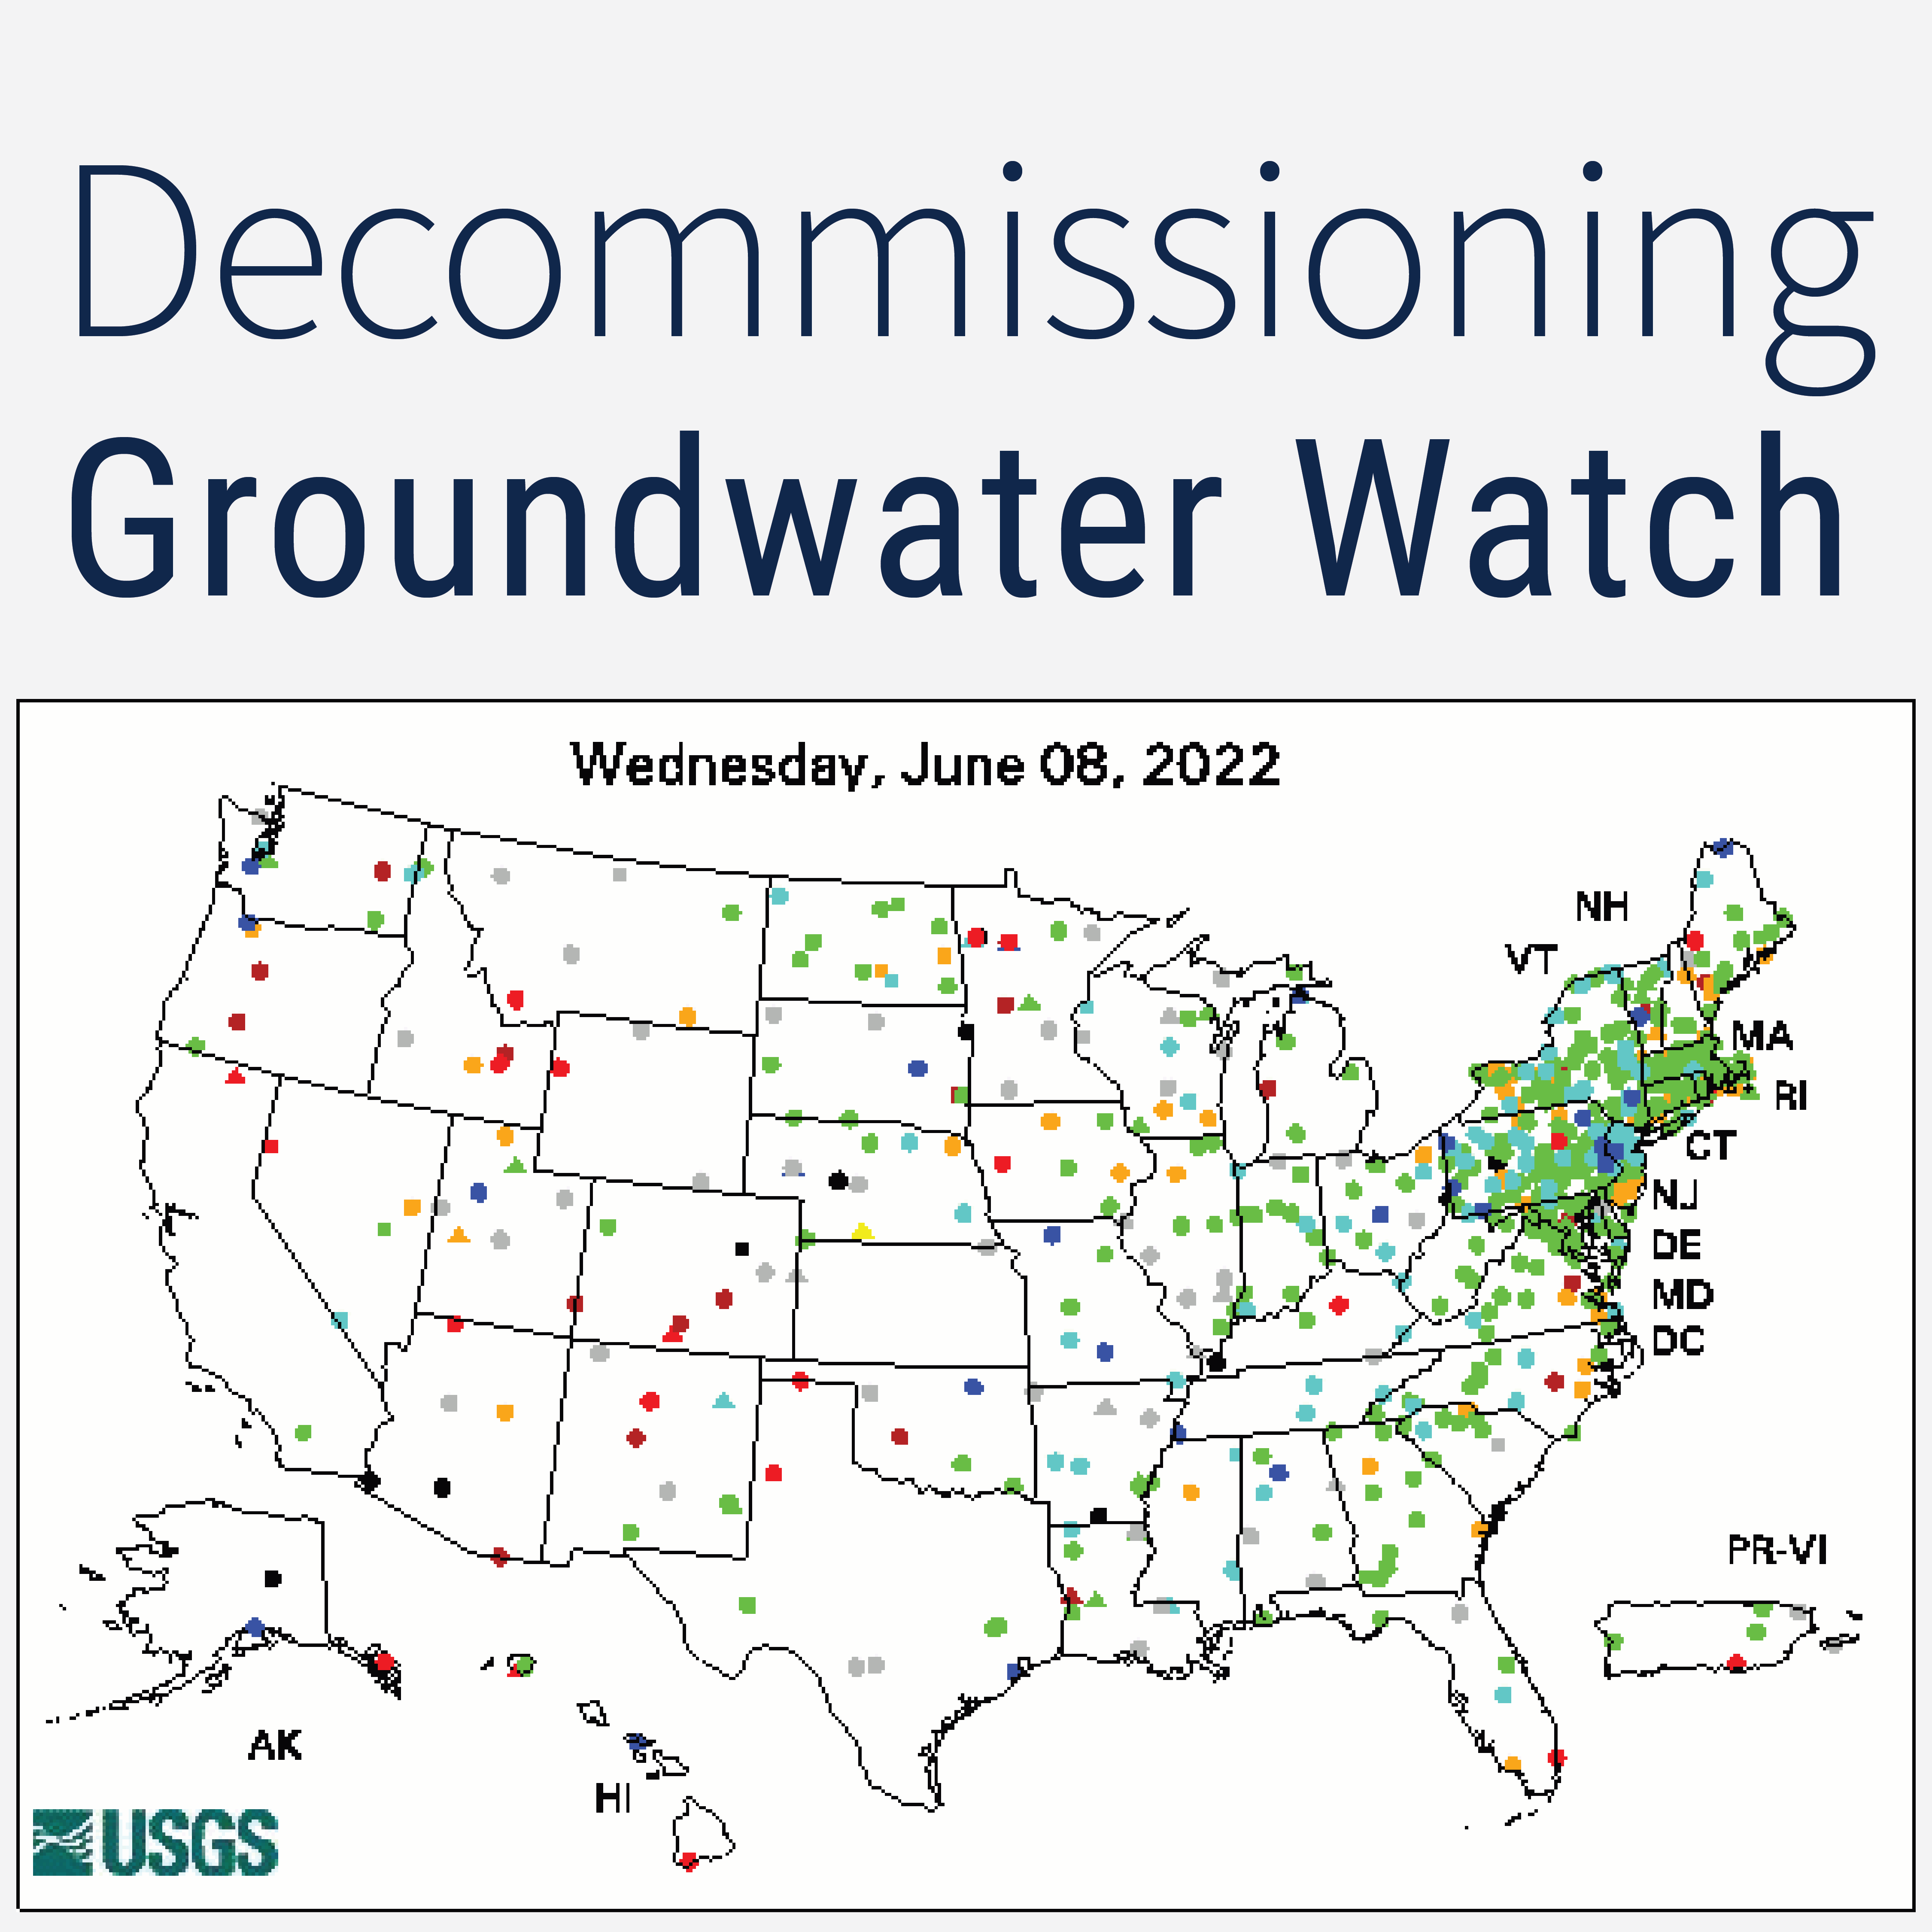 Decommissioning Groundwater Watch